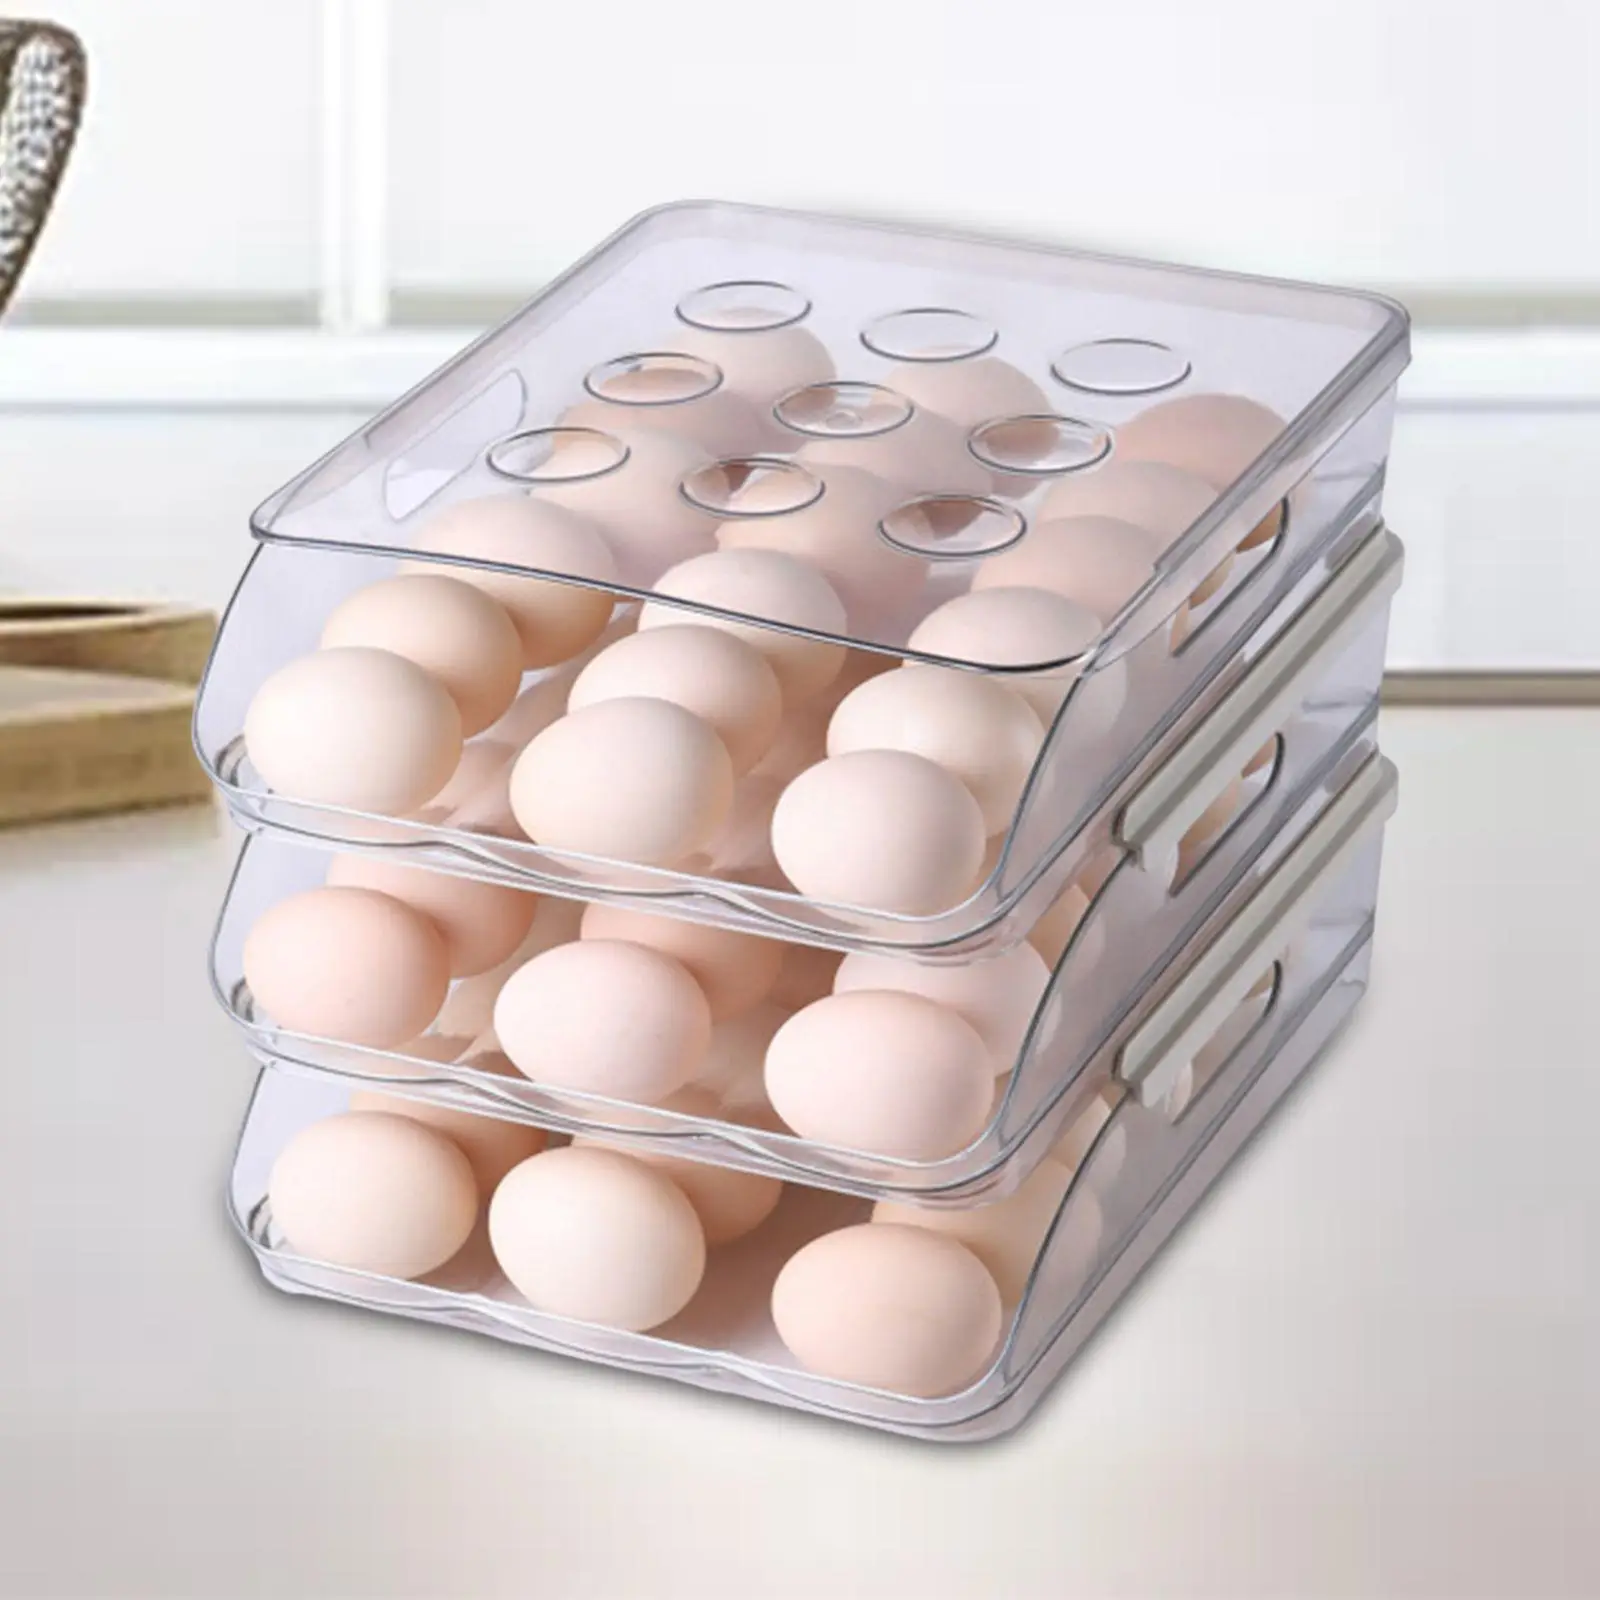 Transparent Egg Box Stackable Egg Container Multi Layer Egg Tray Organizer Bin Auto Rolling for Countertop Drawer Refrigerator